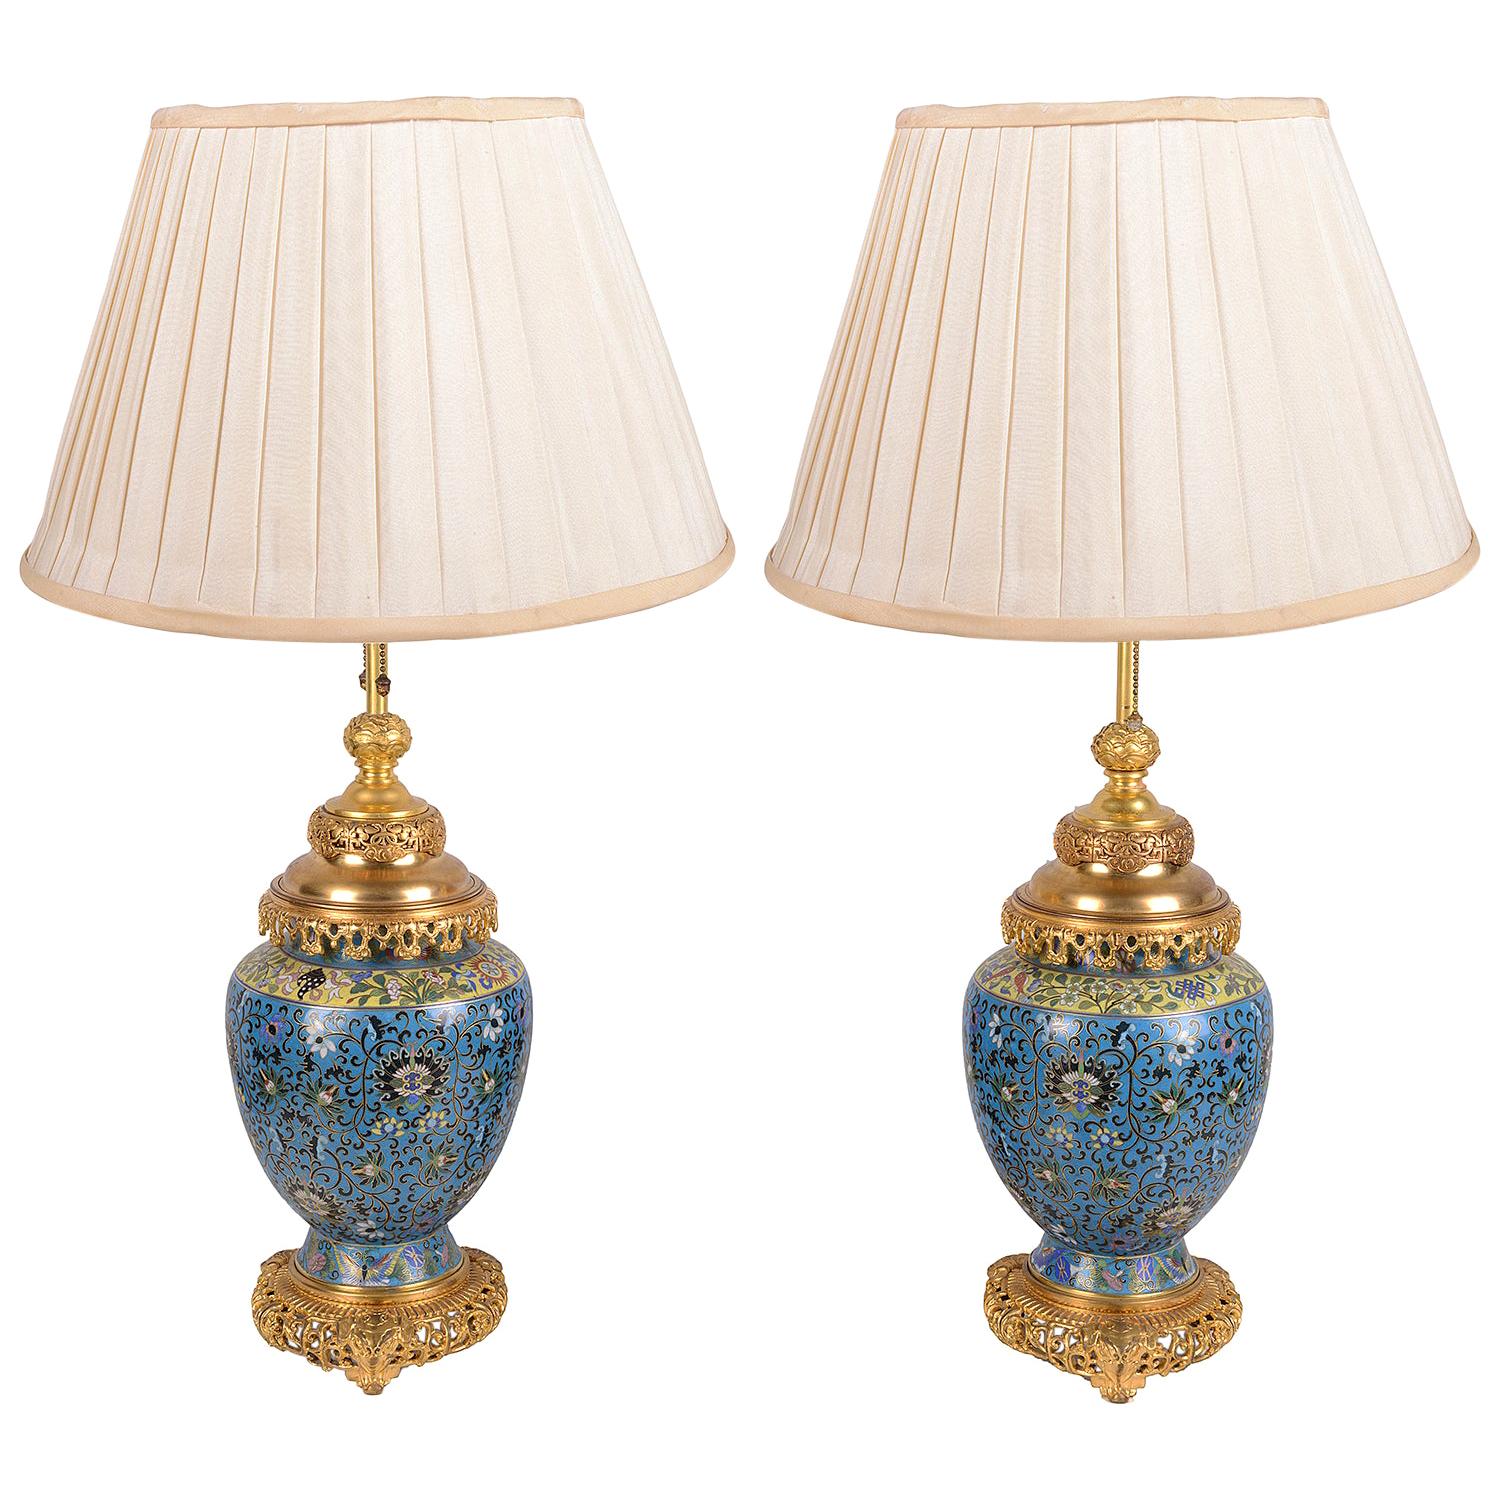 Pair of Early 20th Century Cloisonné Vases / Lamps For Sale